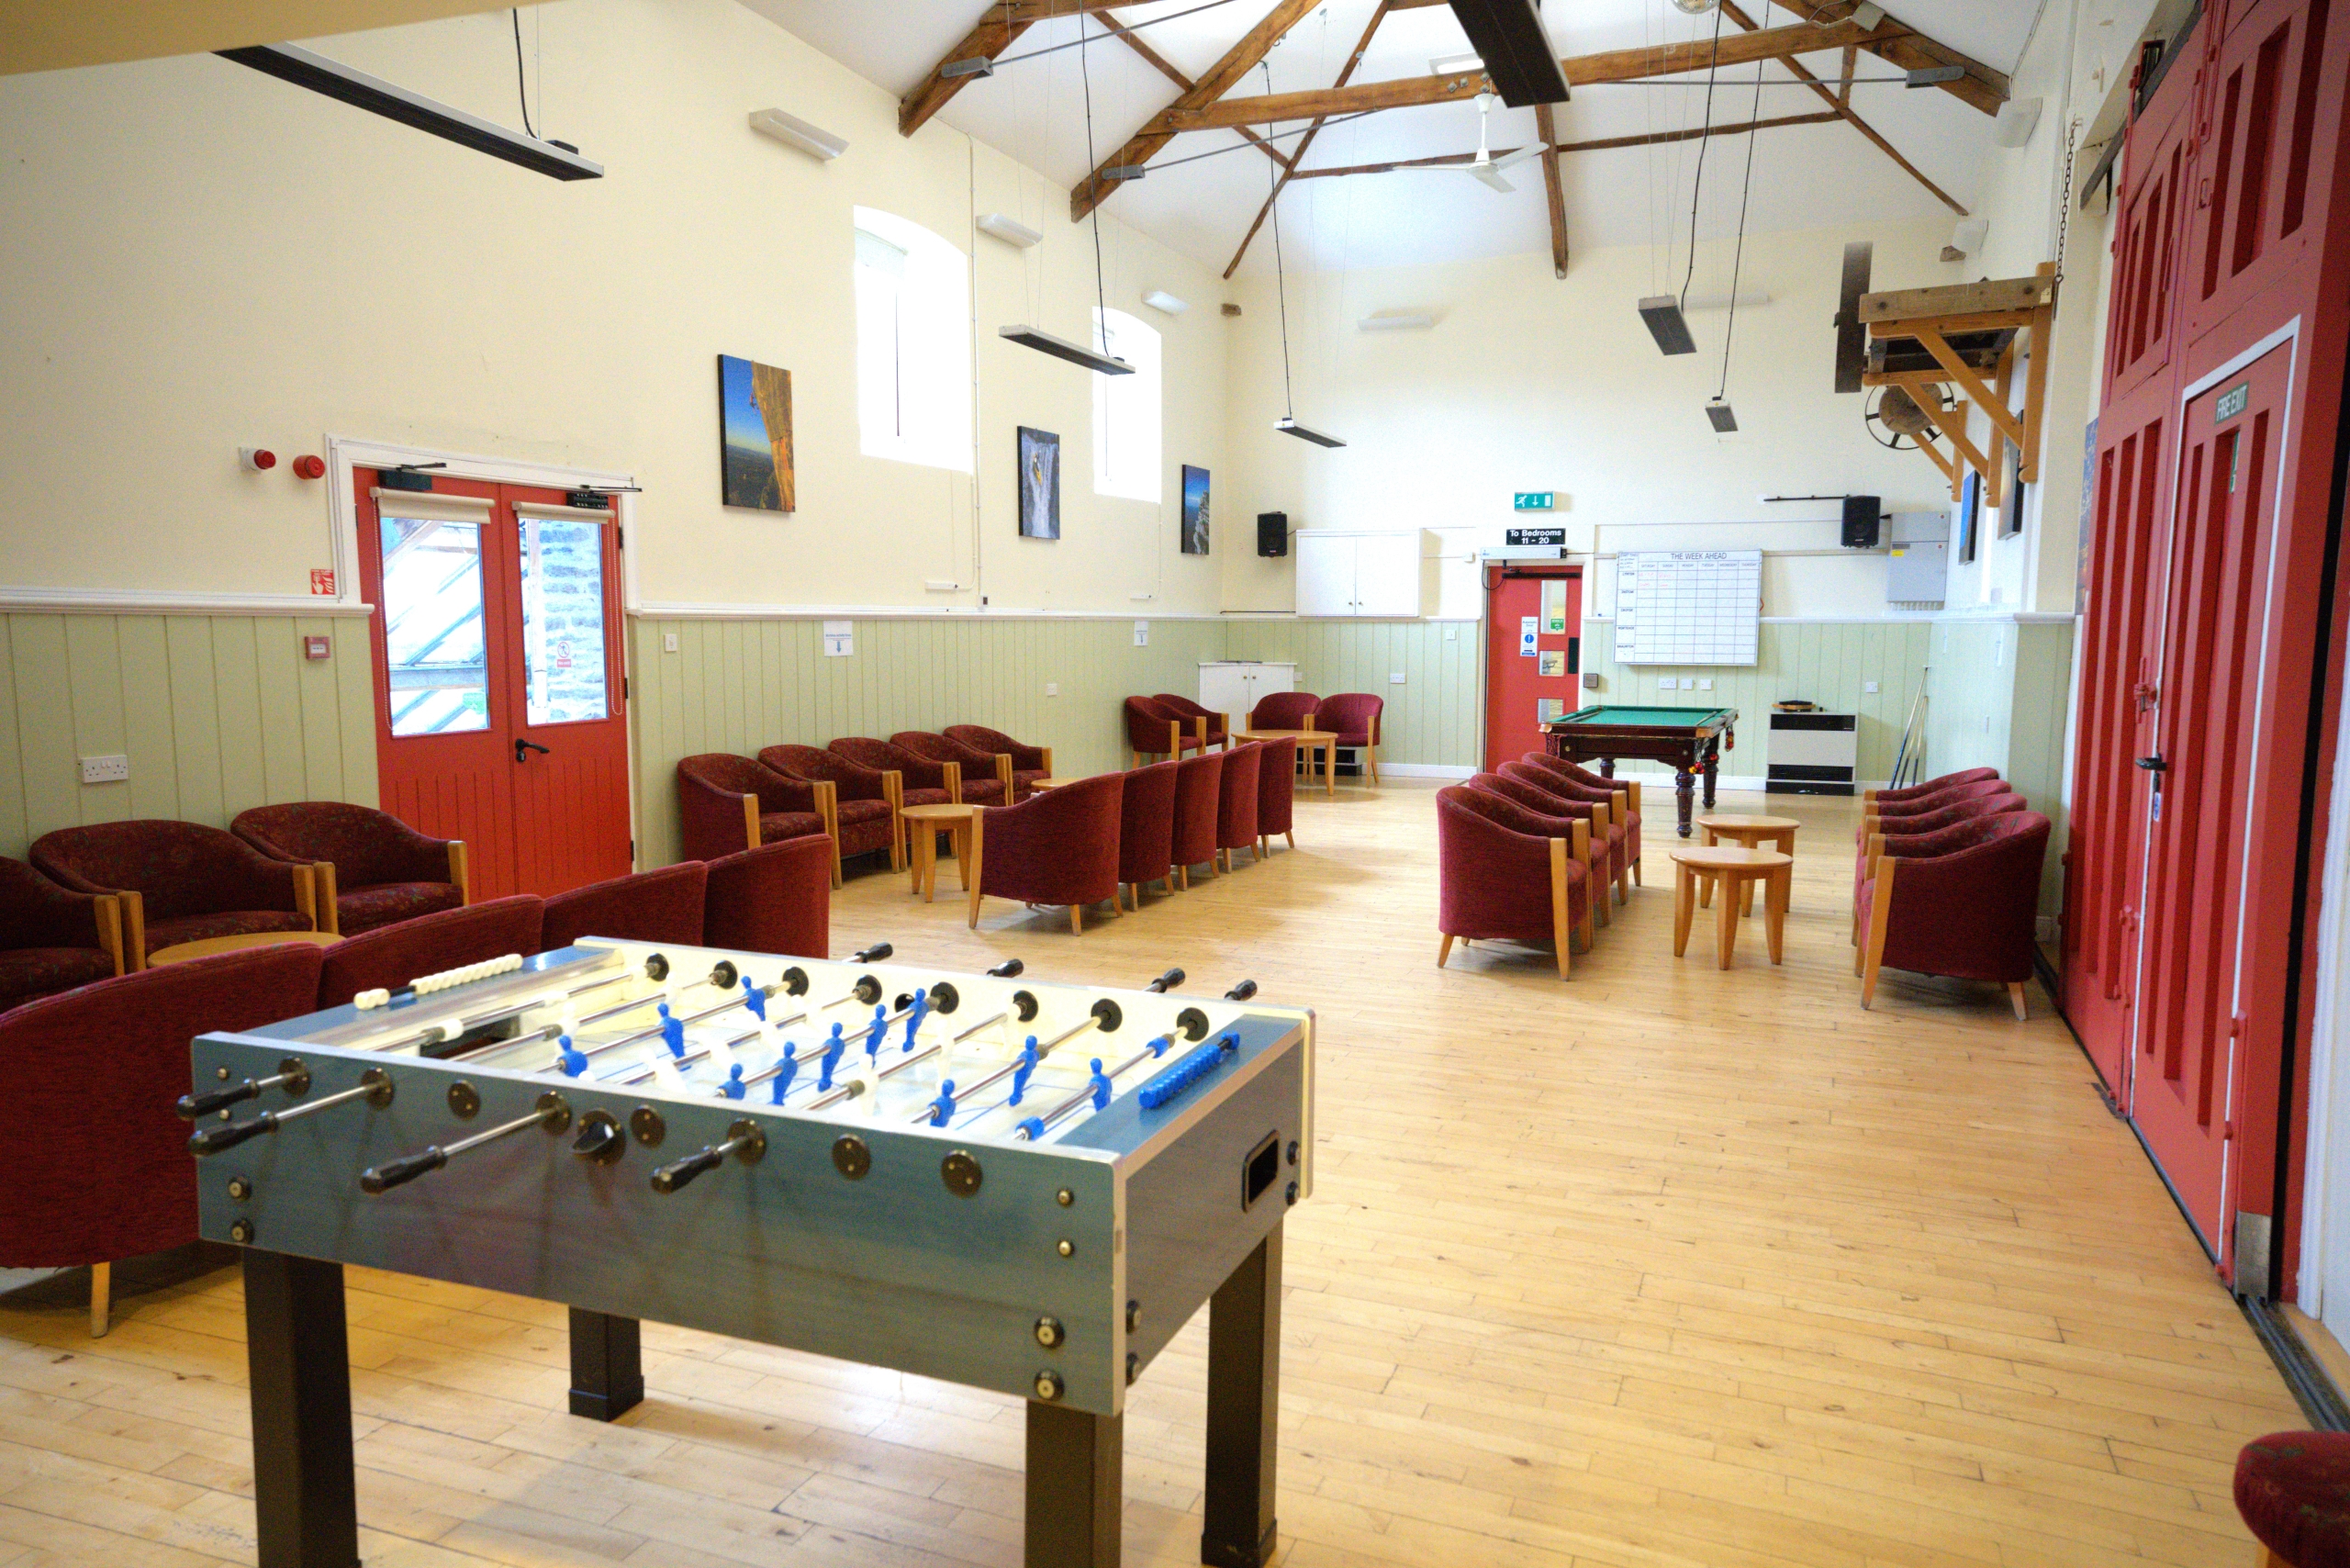 An open plan naturally lit indoor barn conversion with red doors to the right, one on the left and one at the back of the room with rows of comfortable arm chairs and tables, as well as a pool table and indoor foosball table.